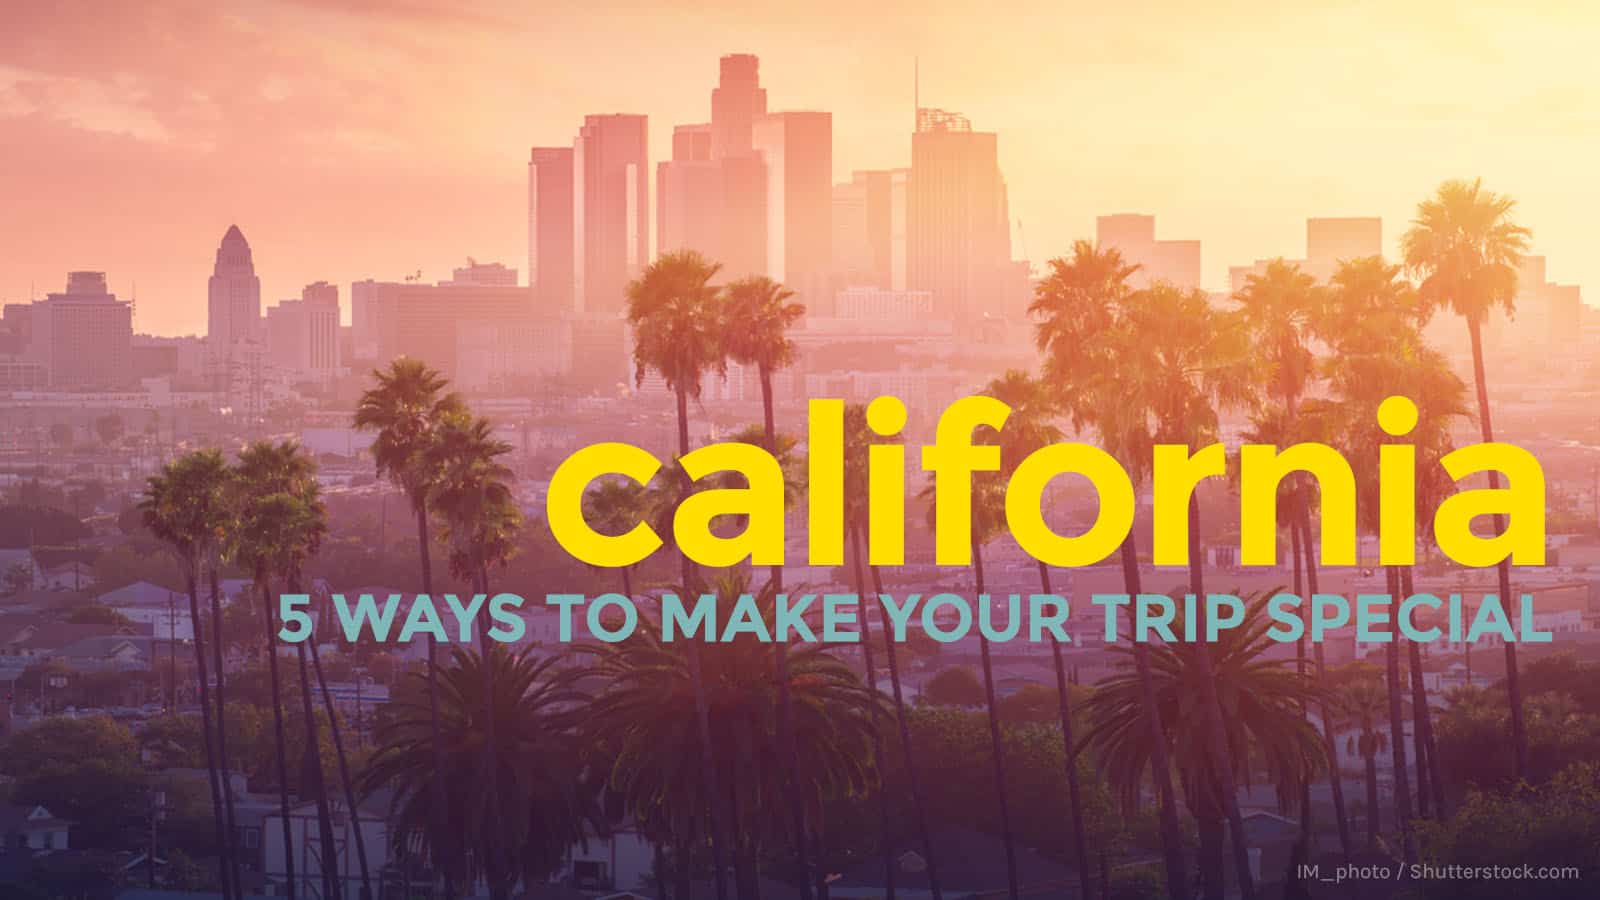 California: 5 Ways to Make Your Trip More Special